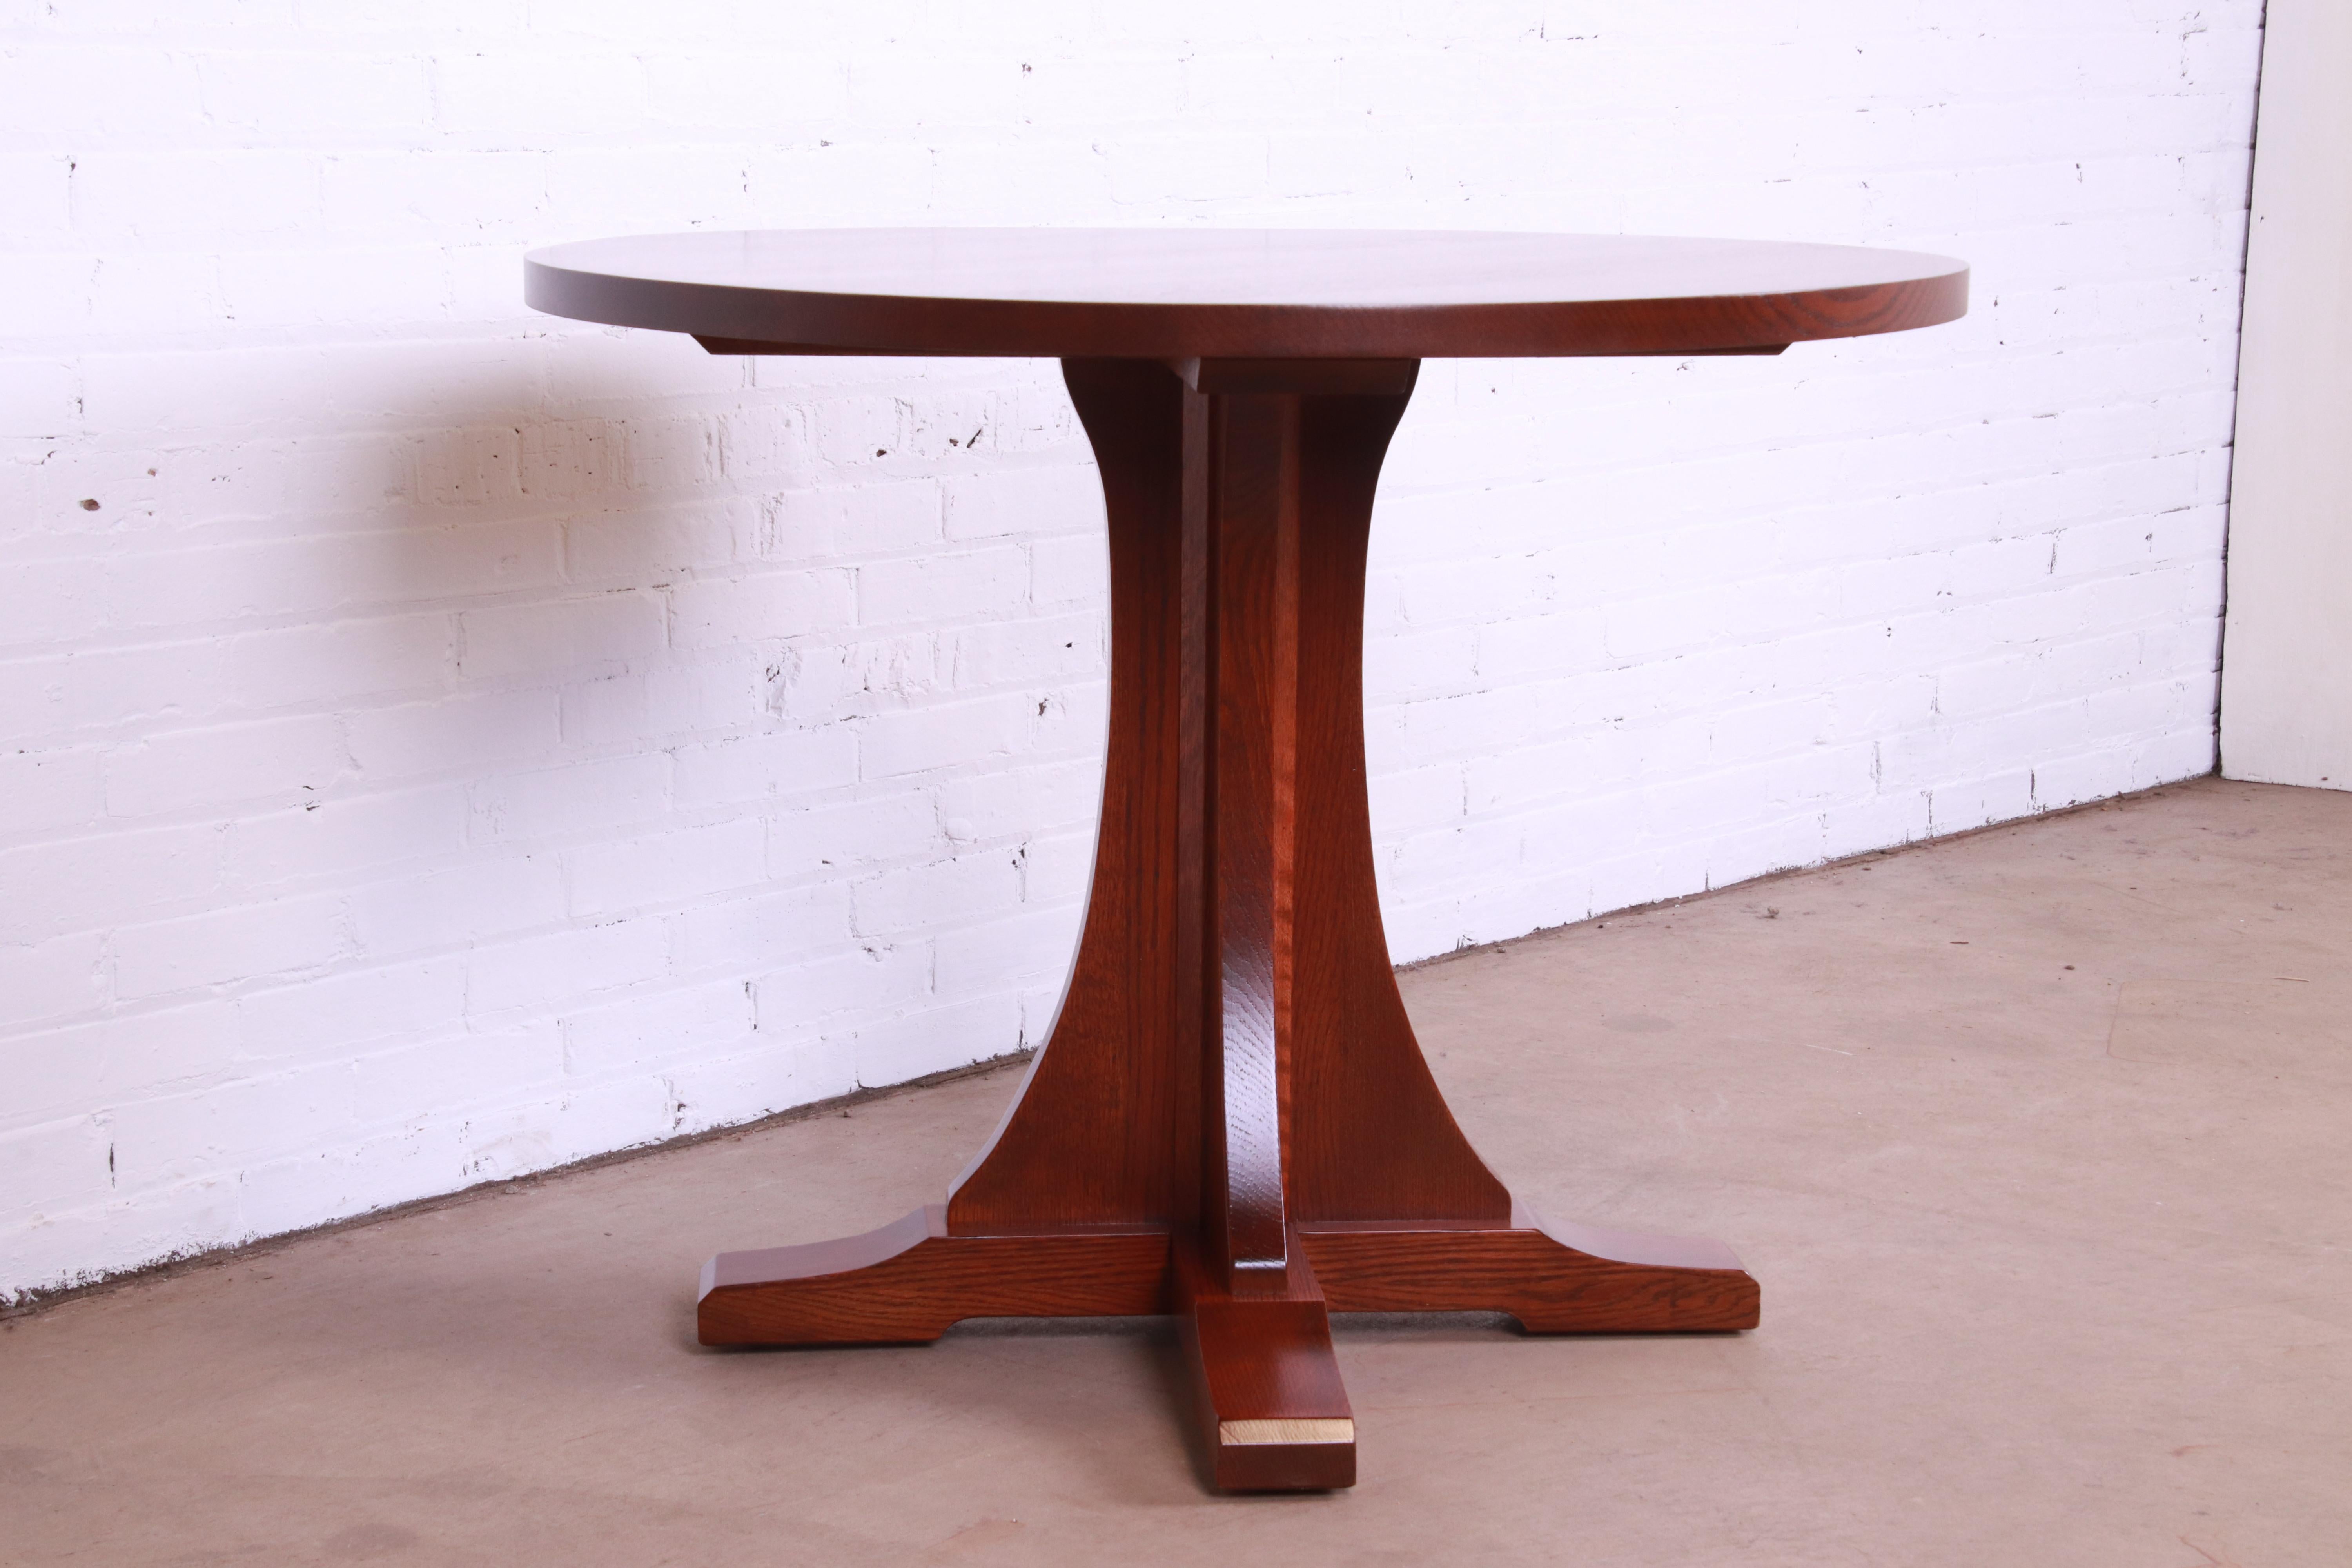 Contemporary Stickley Mission Oak Arts & Crafts Center Table or Dining Table, Refinished